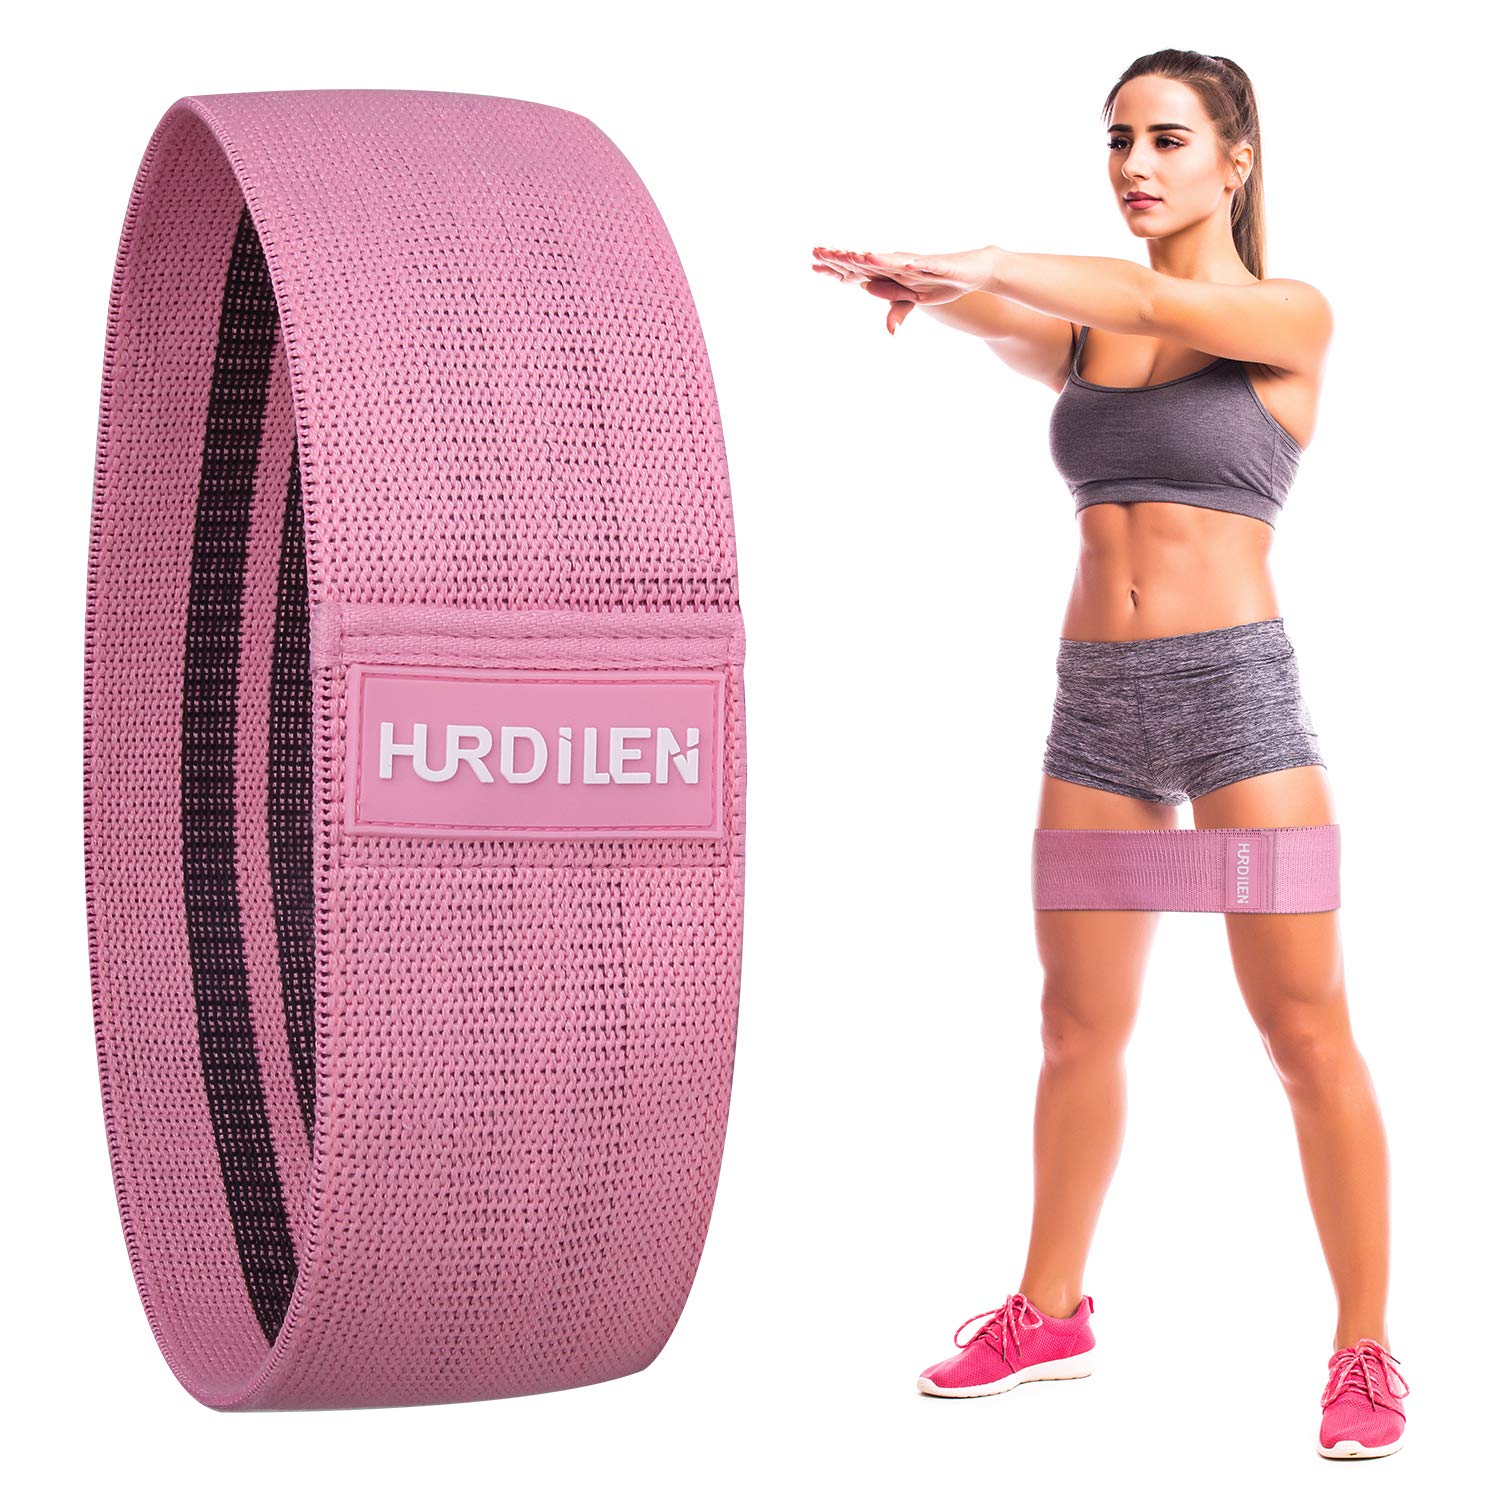 Hurdilen Resistance Bands Loop Exercise Bands,Workout Bands Hip Bands Wide Resistance Bands Hip Resistance Band for Legs and Butt,Activate Glutes and Thigh 